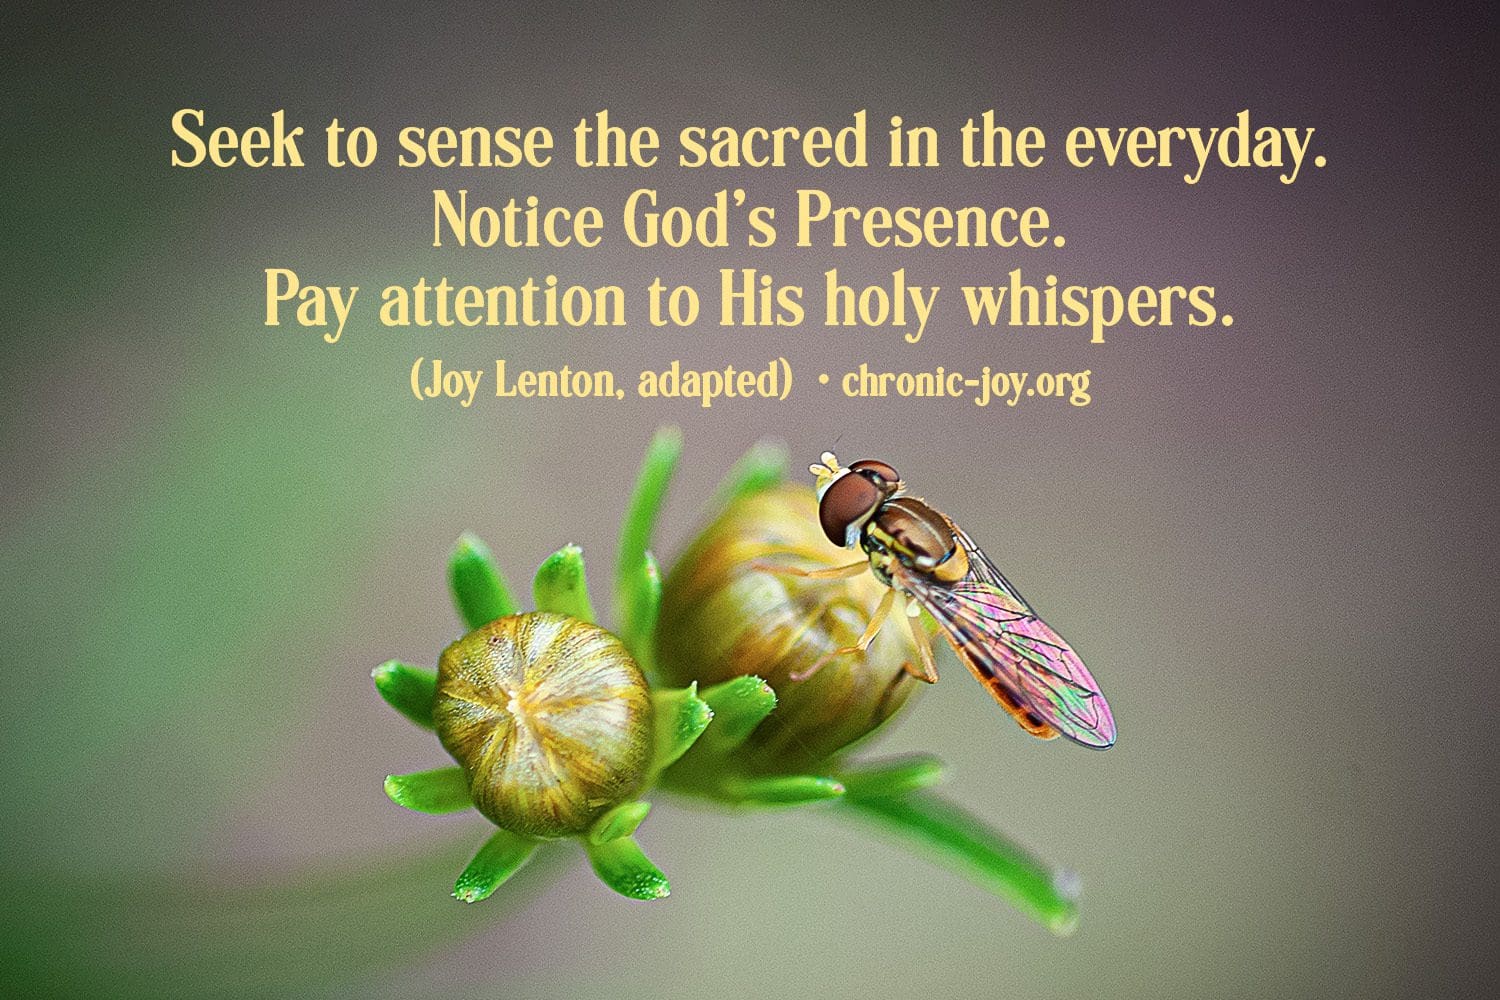 "Seek to sense the sacred in the everyday. Notice God's Presence. Pay attention to His holy whispers." (Joy Lenton, adapted)